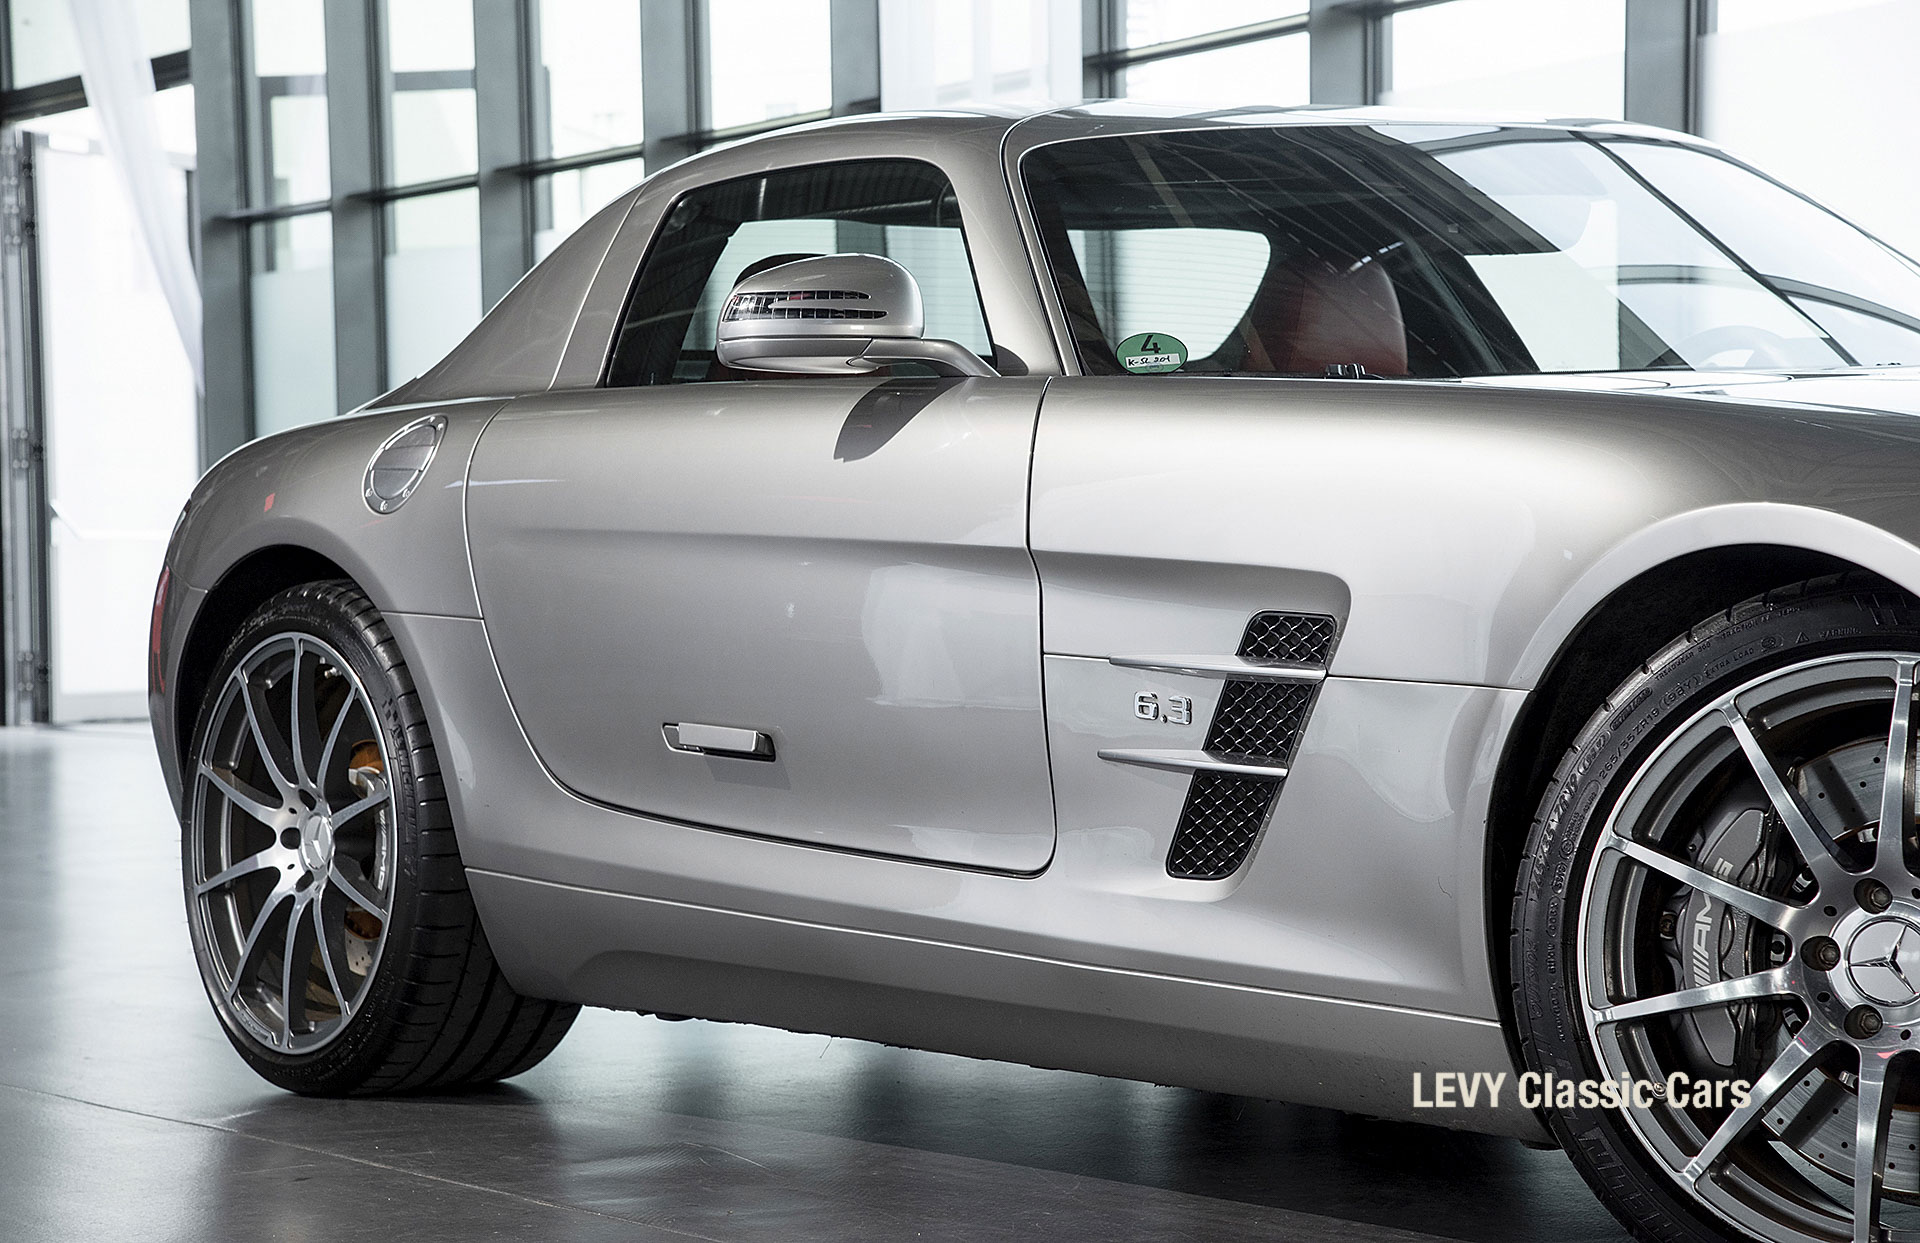 MB SLS AMG 6,3 Coupe 05633 020